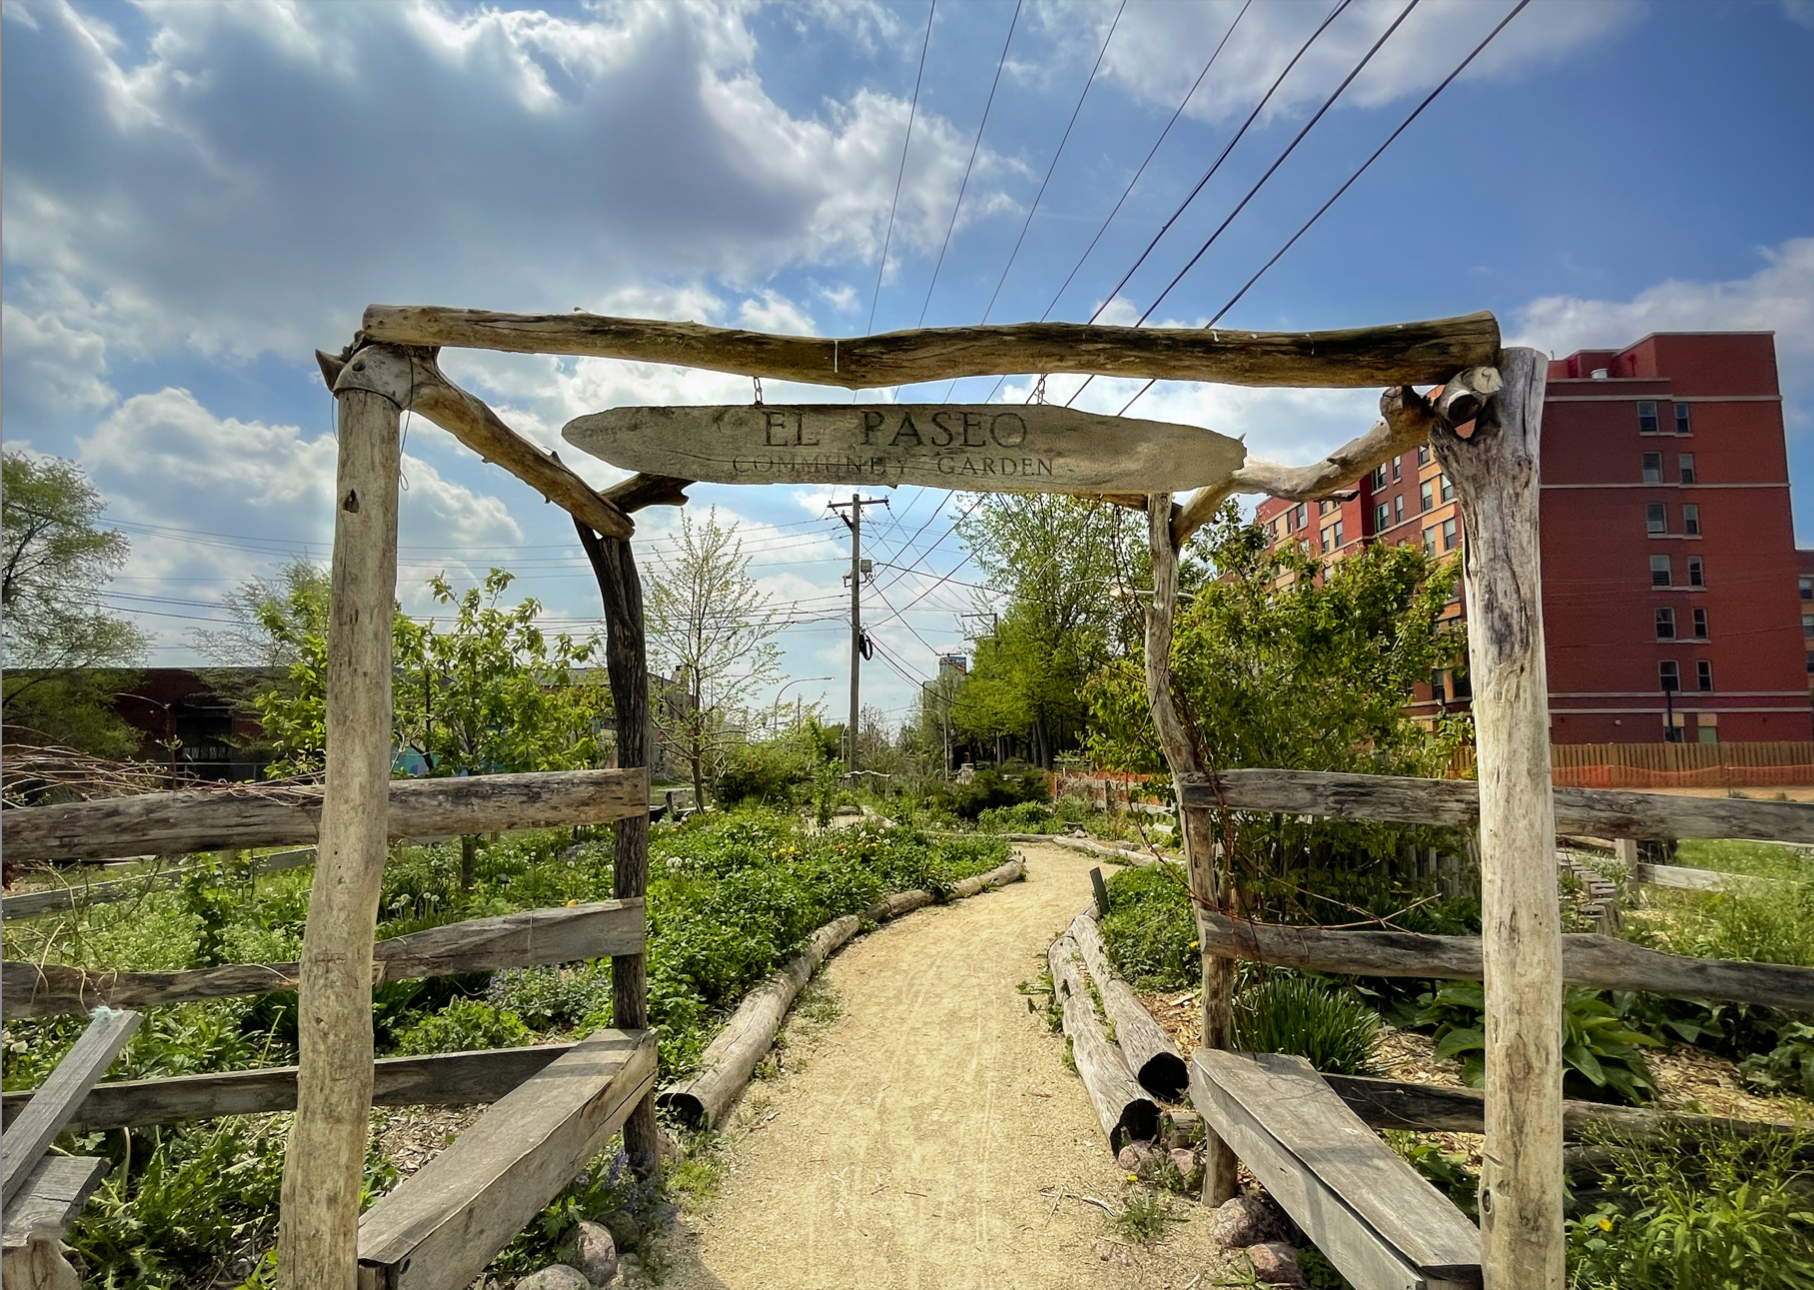 A picture of the permaculture site within the garden. A four poster wooden entryway with a sign reading “El Paseo Community Garden” in the middle. Lucious greenery is behind the entryway.